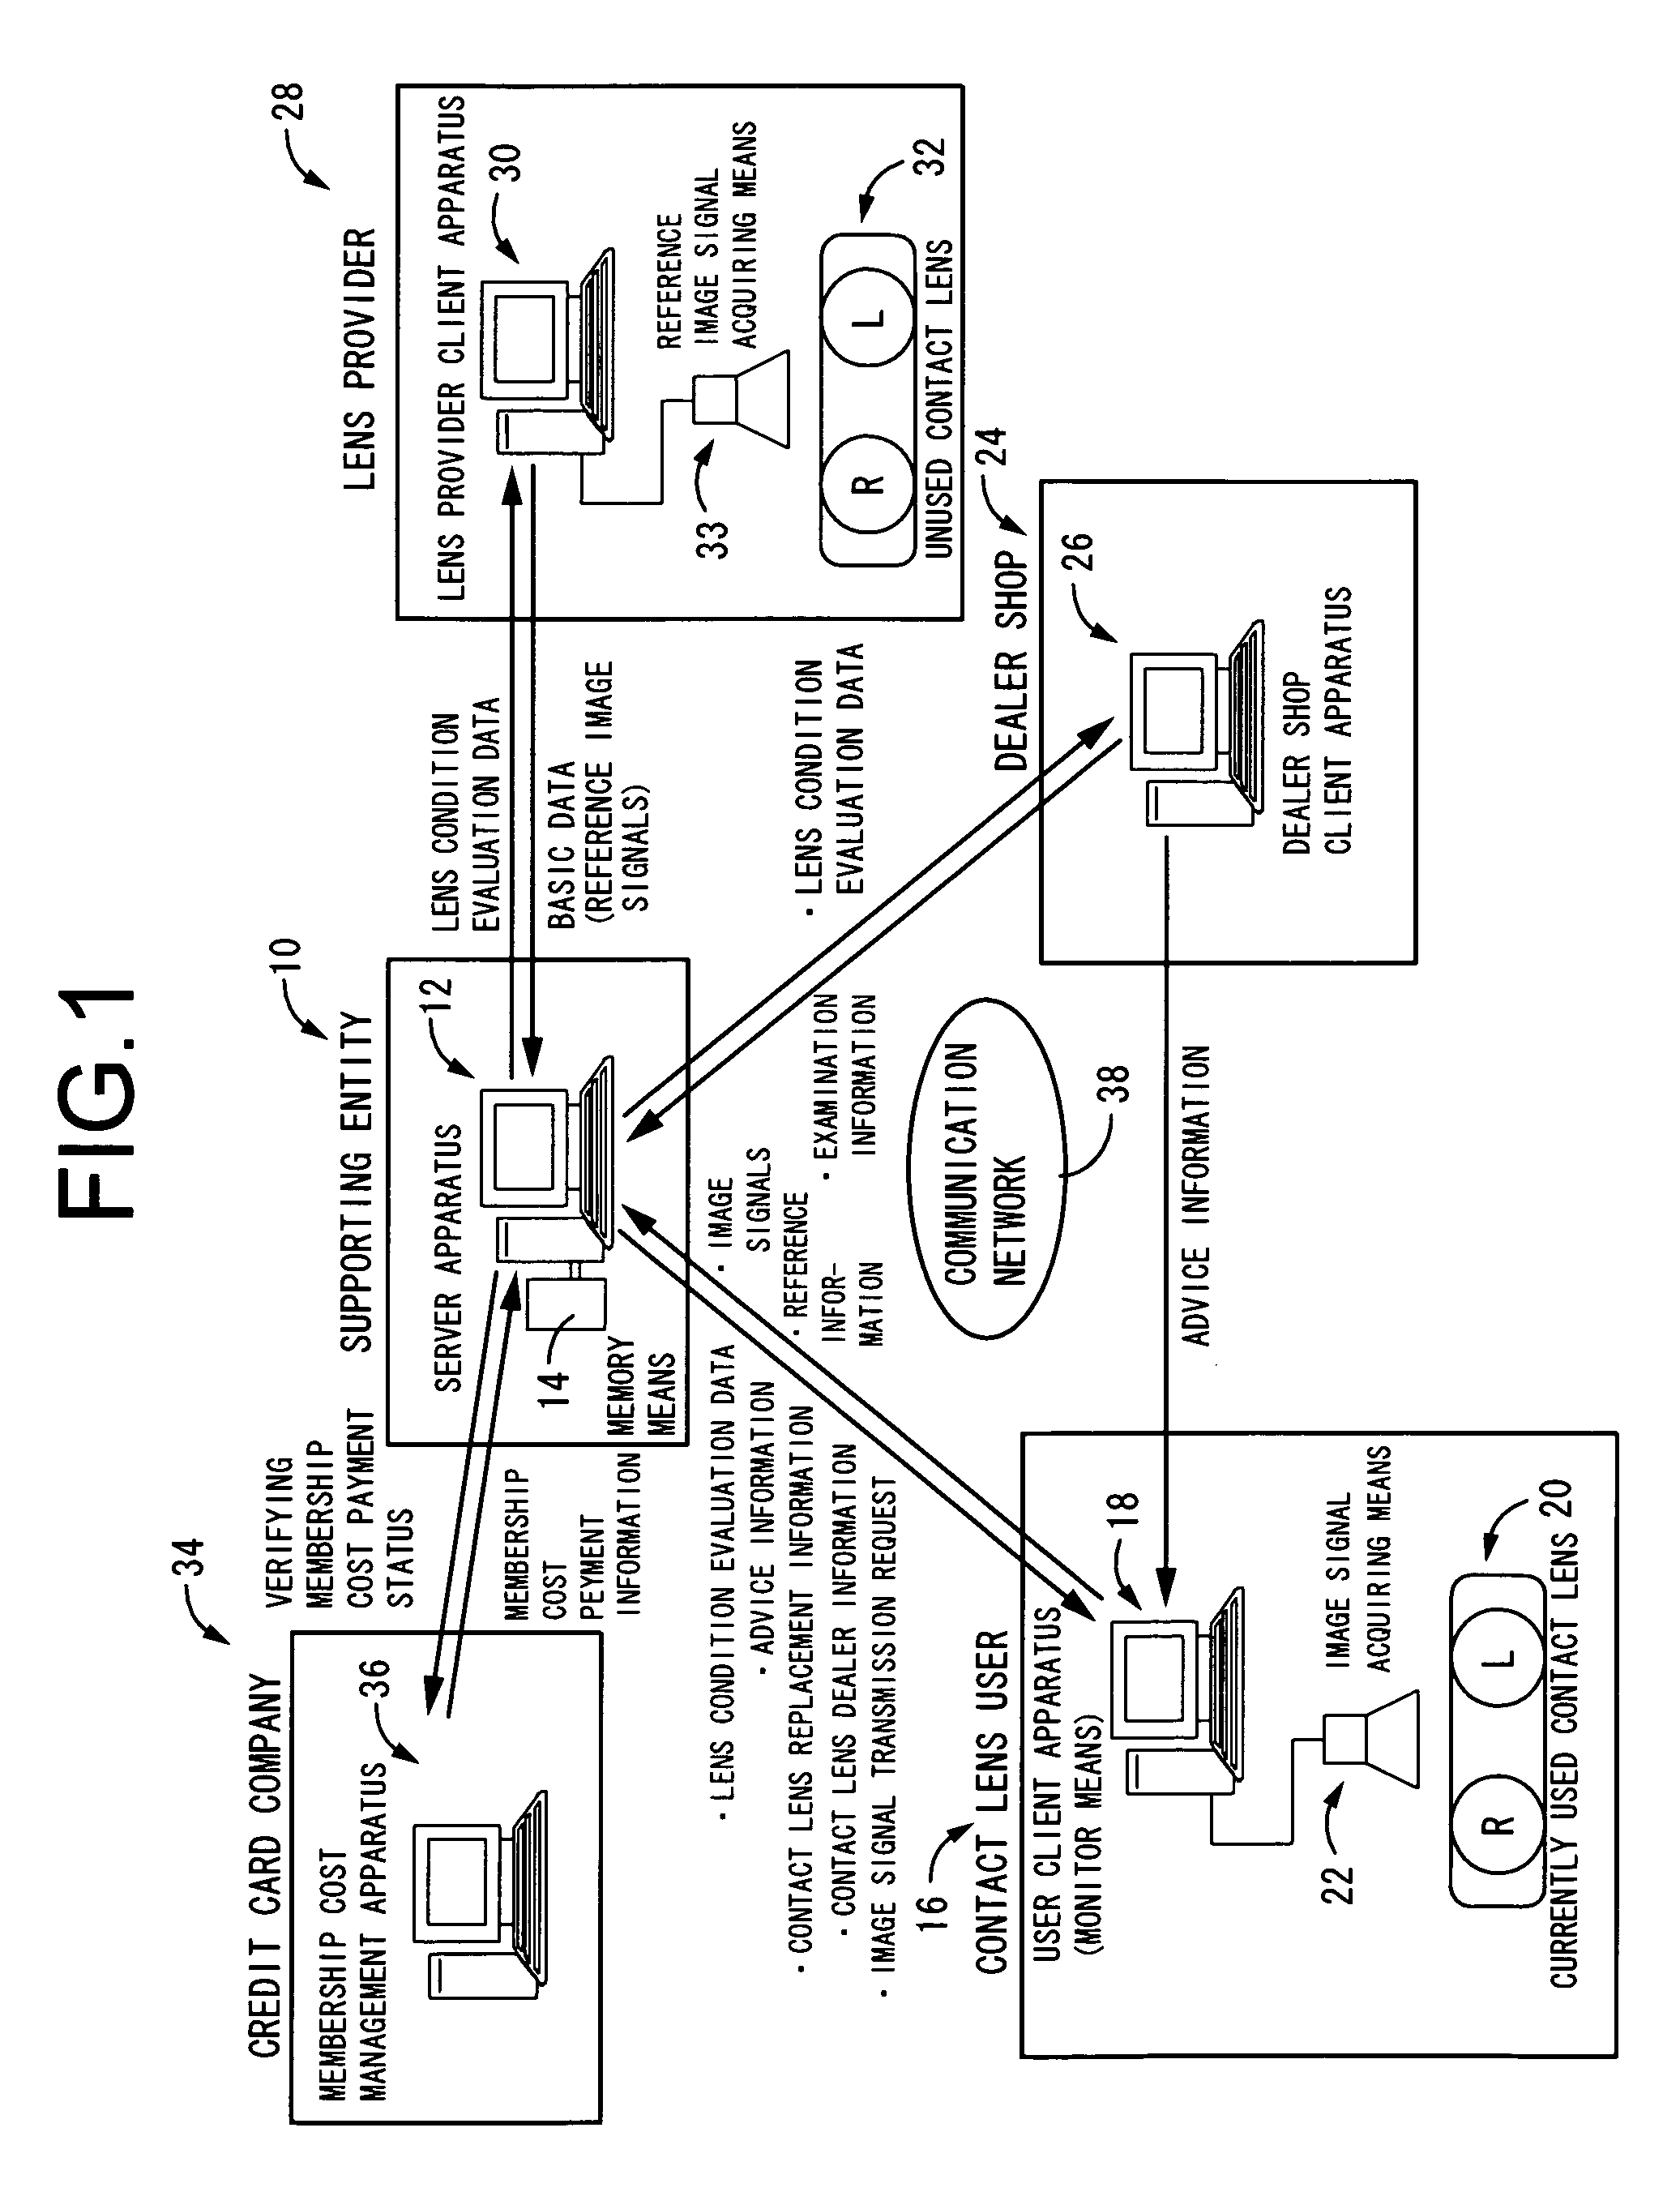 Contact lens user support system and support method